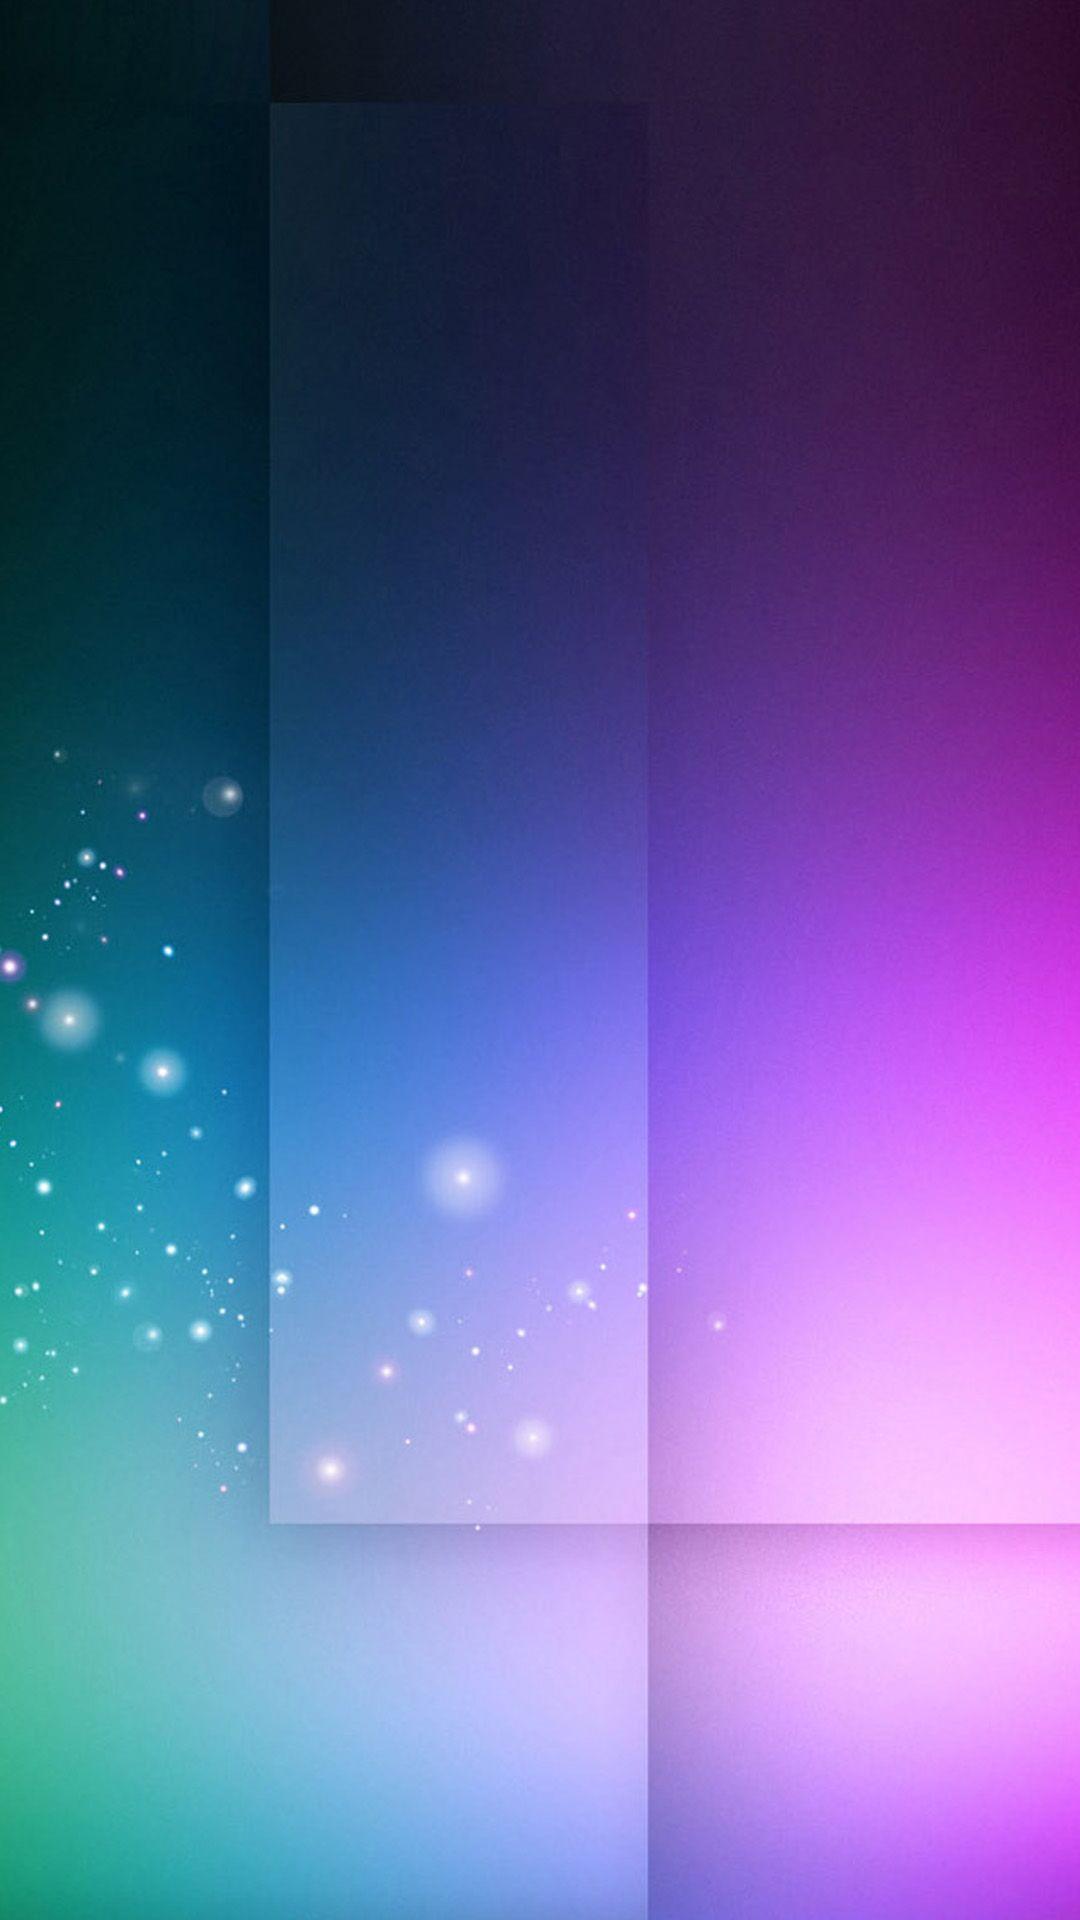 Abstract background light 2 Galaxy Note 3 Wallpaper, Samsung Galaxy